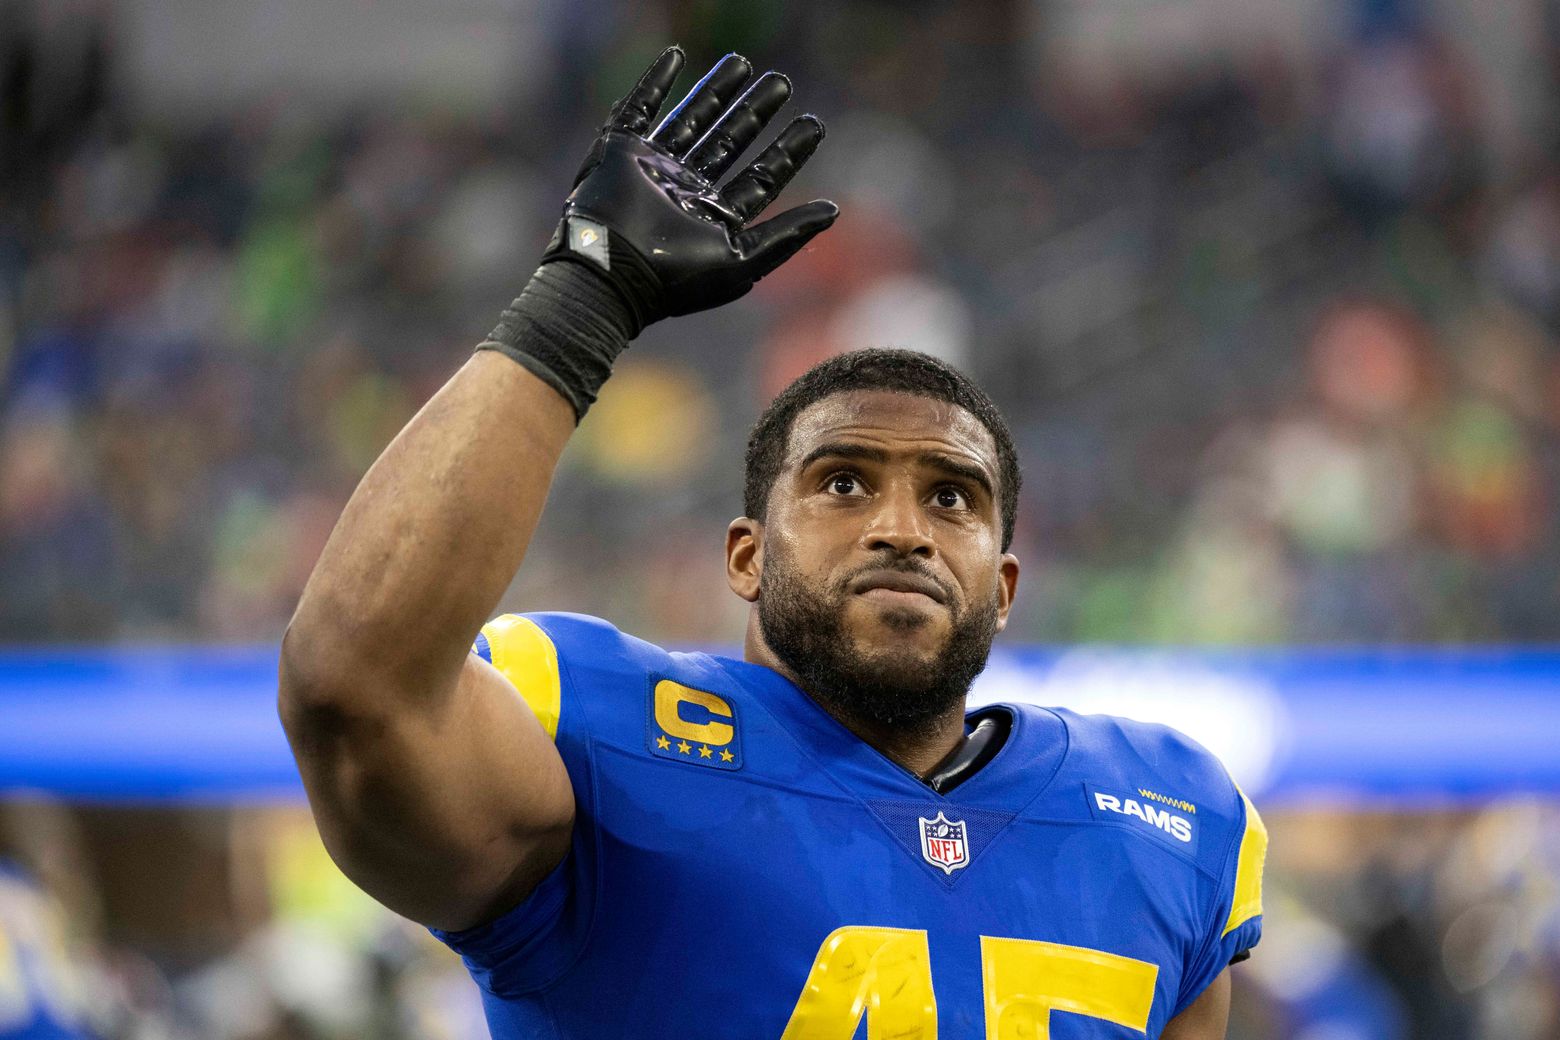 AP source: Rams parting ways with LB Wagner | The Seattle Times